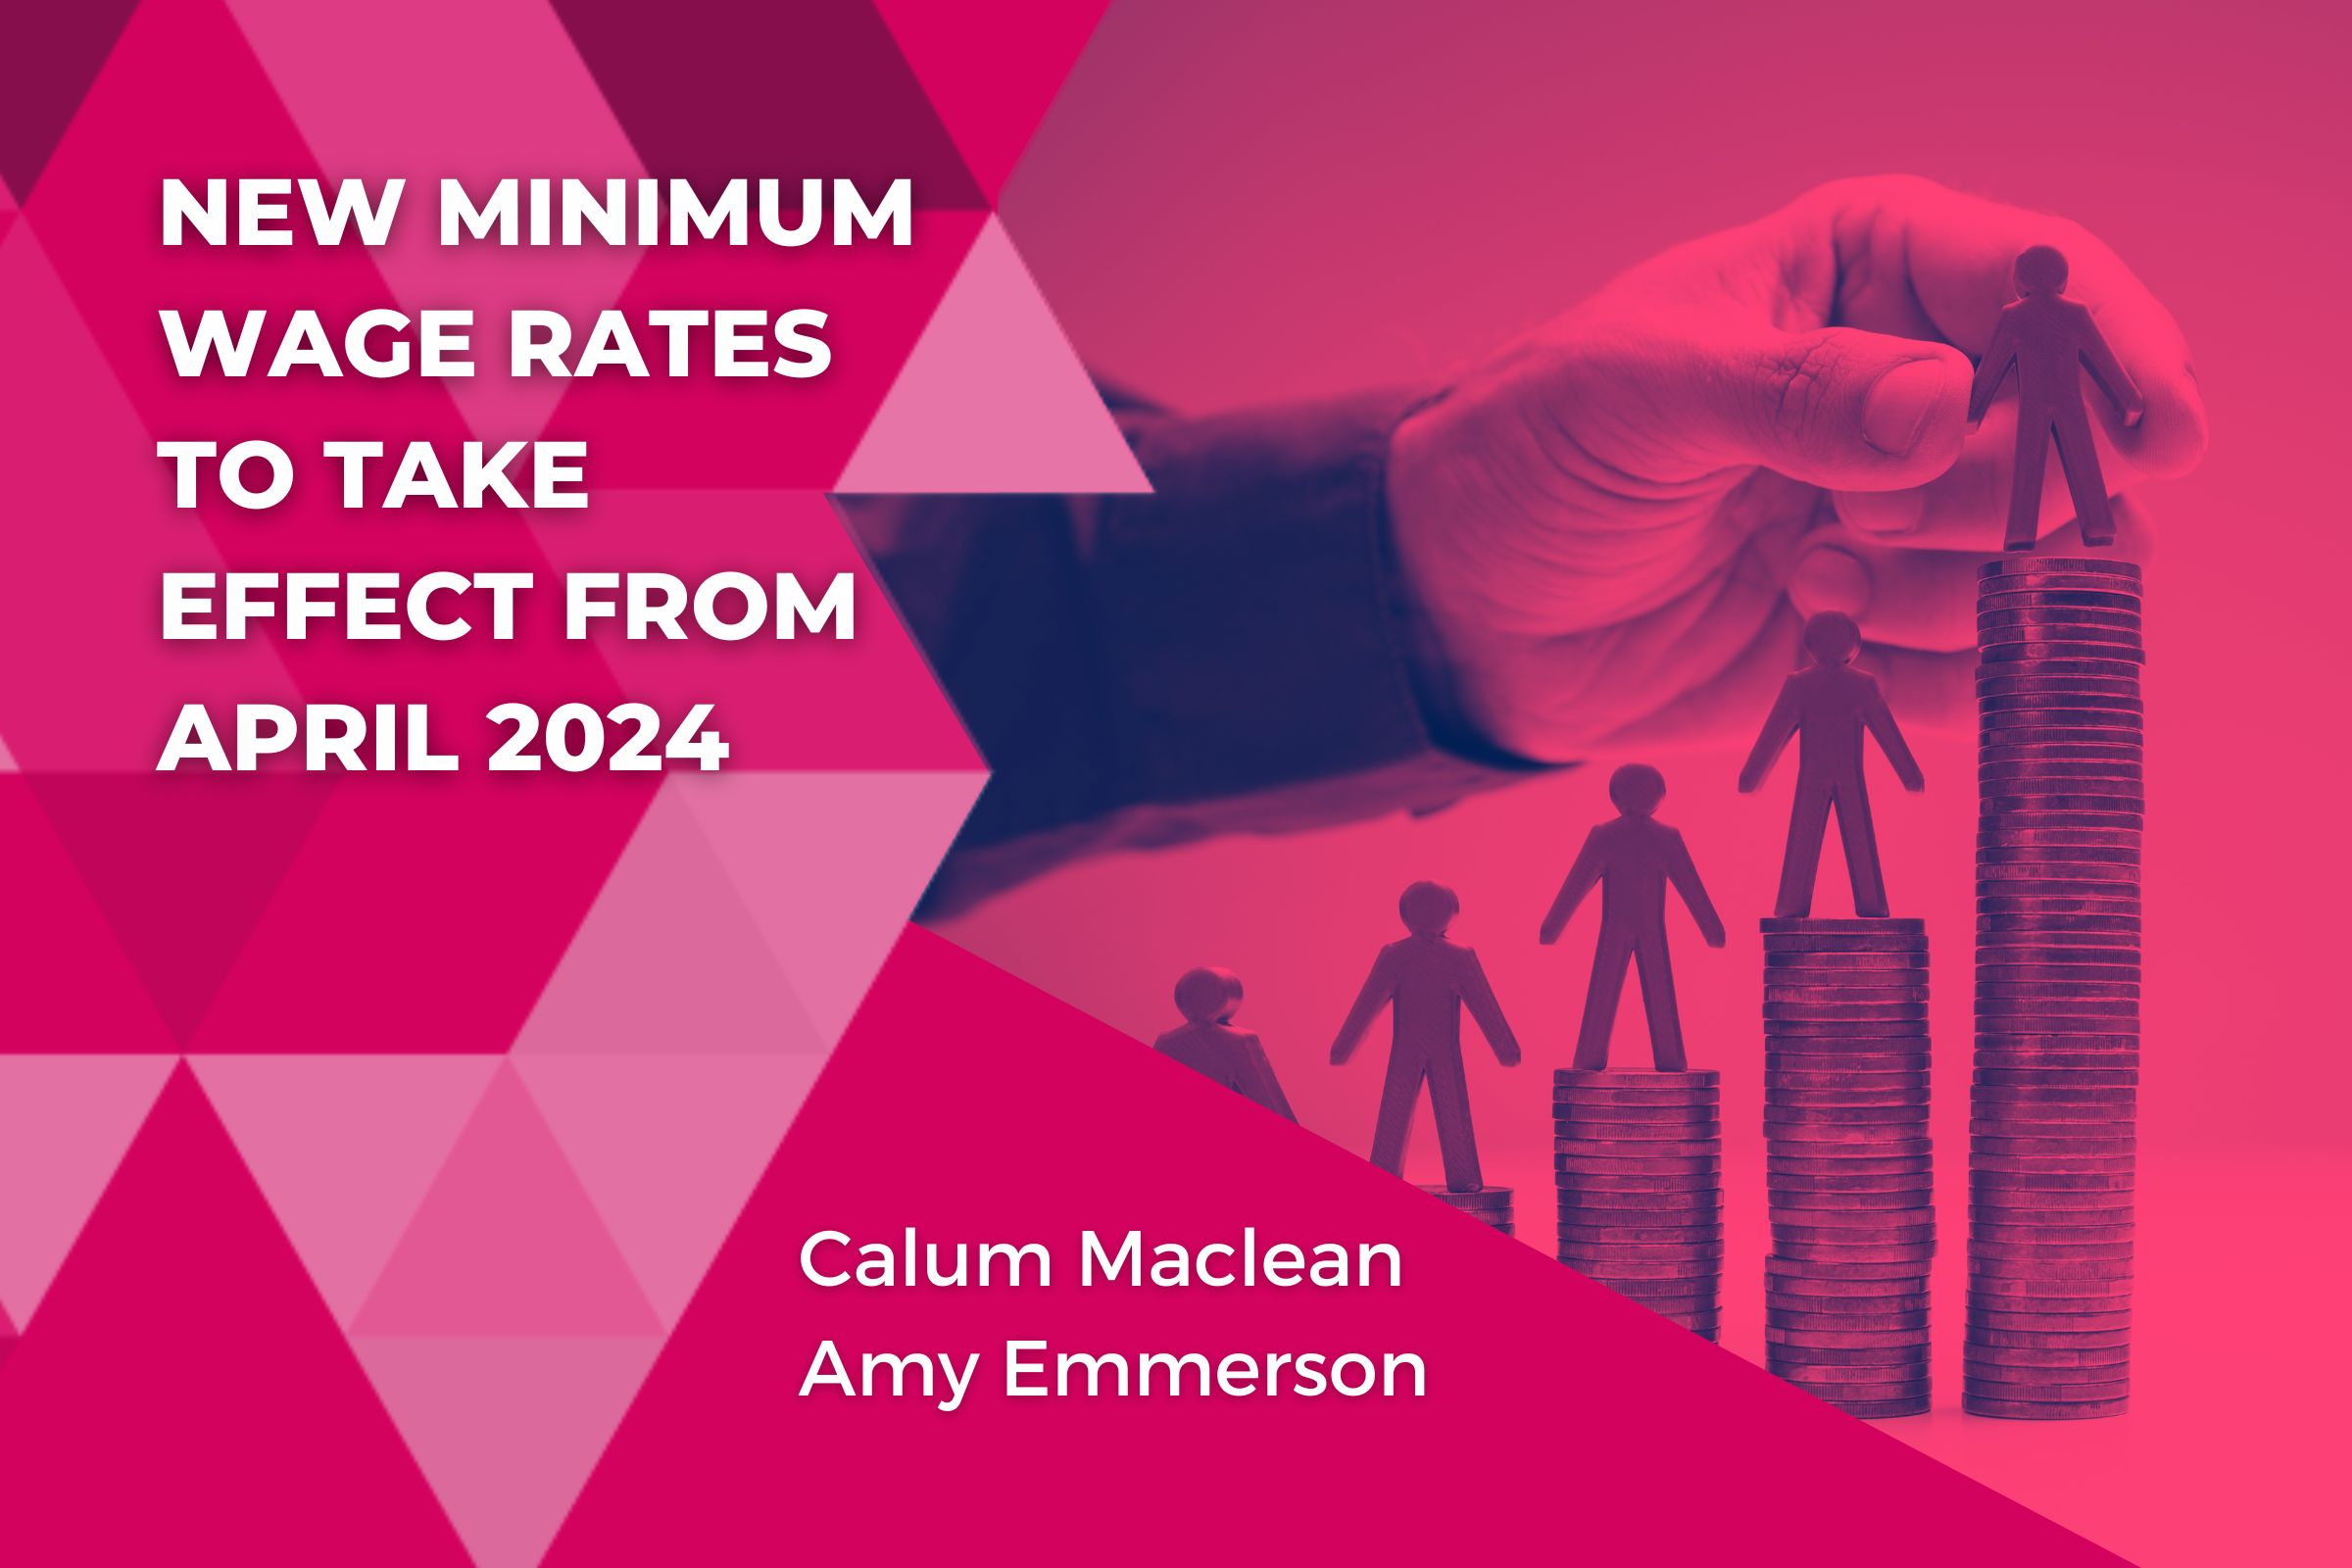 New Minimum Wage Rates to Take Effect From April 2024